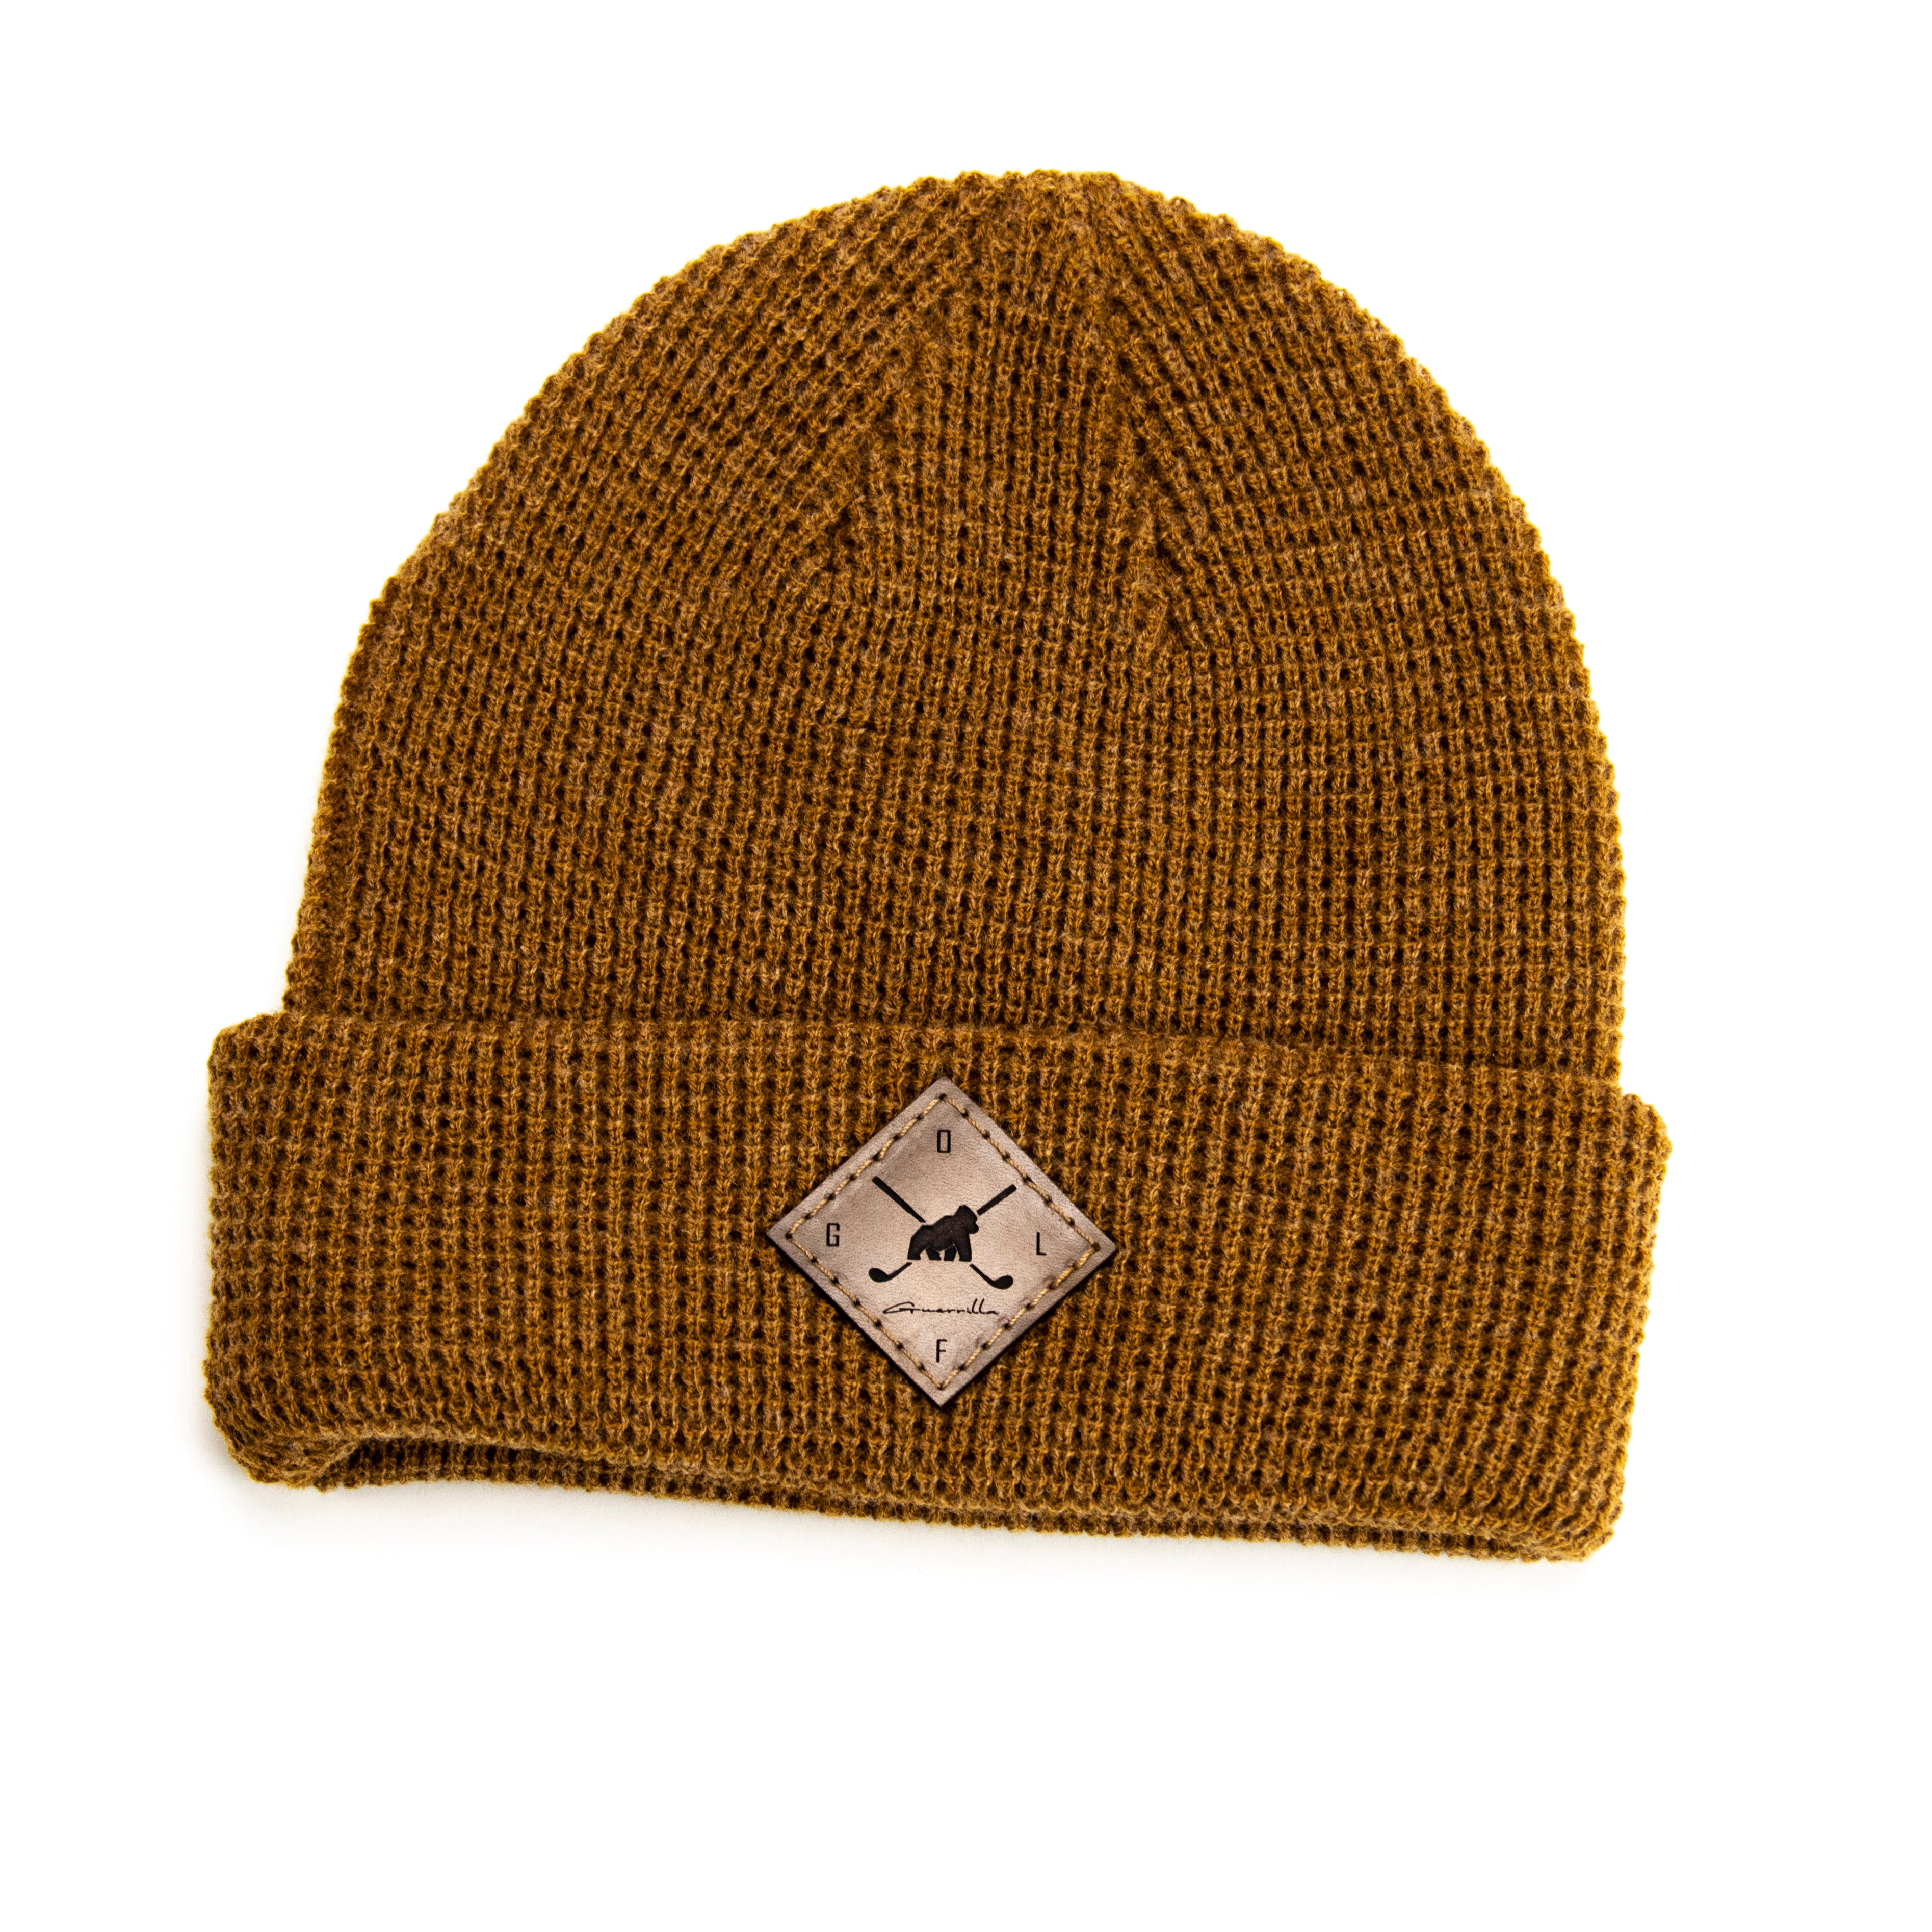 knitted winter hat diamond patch